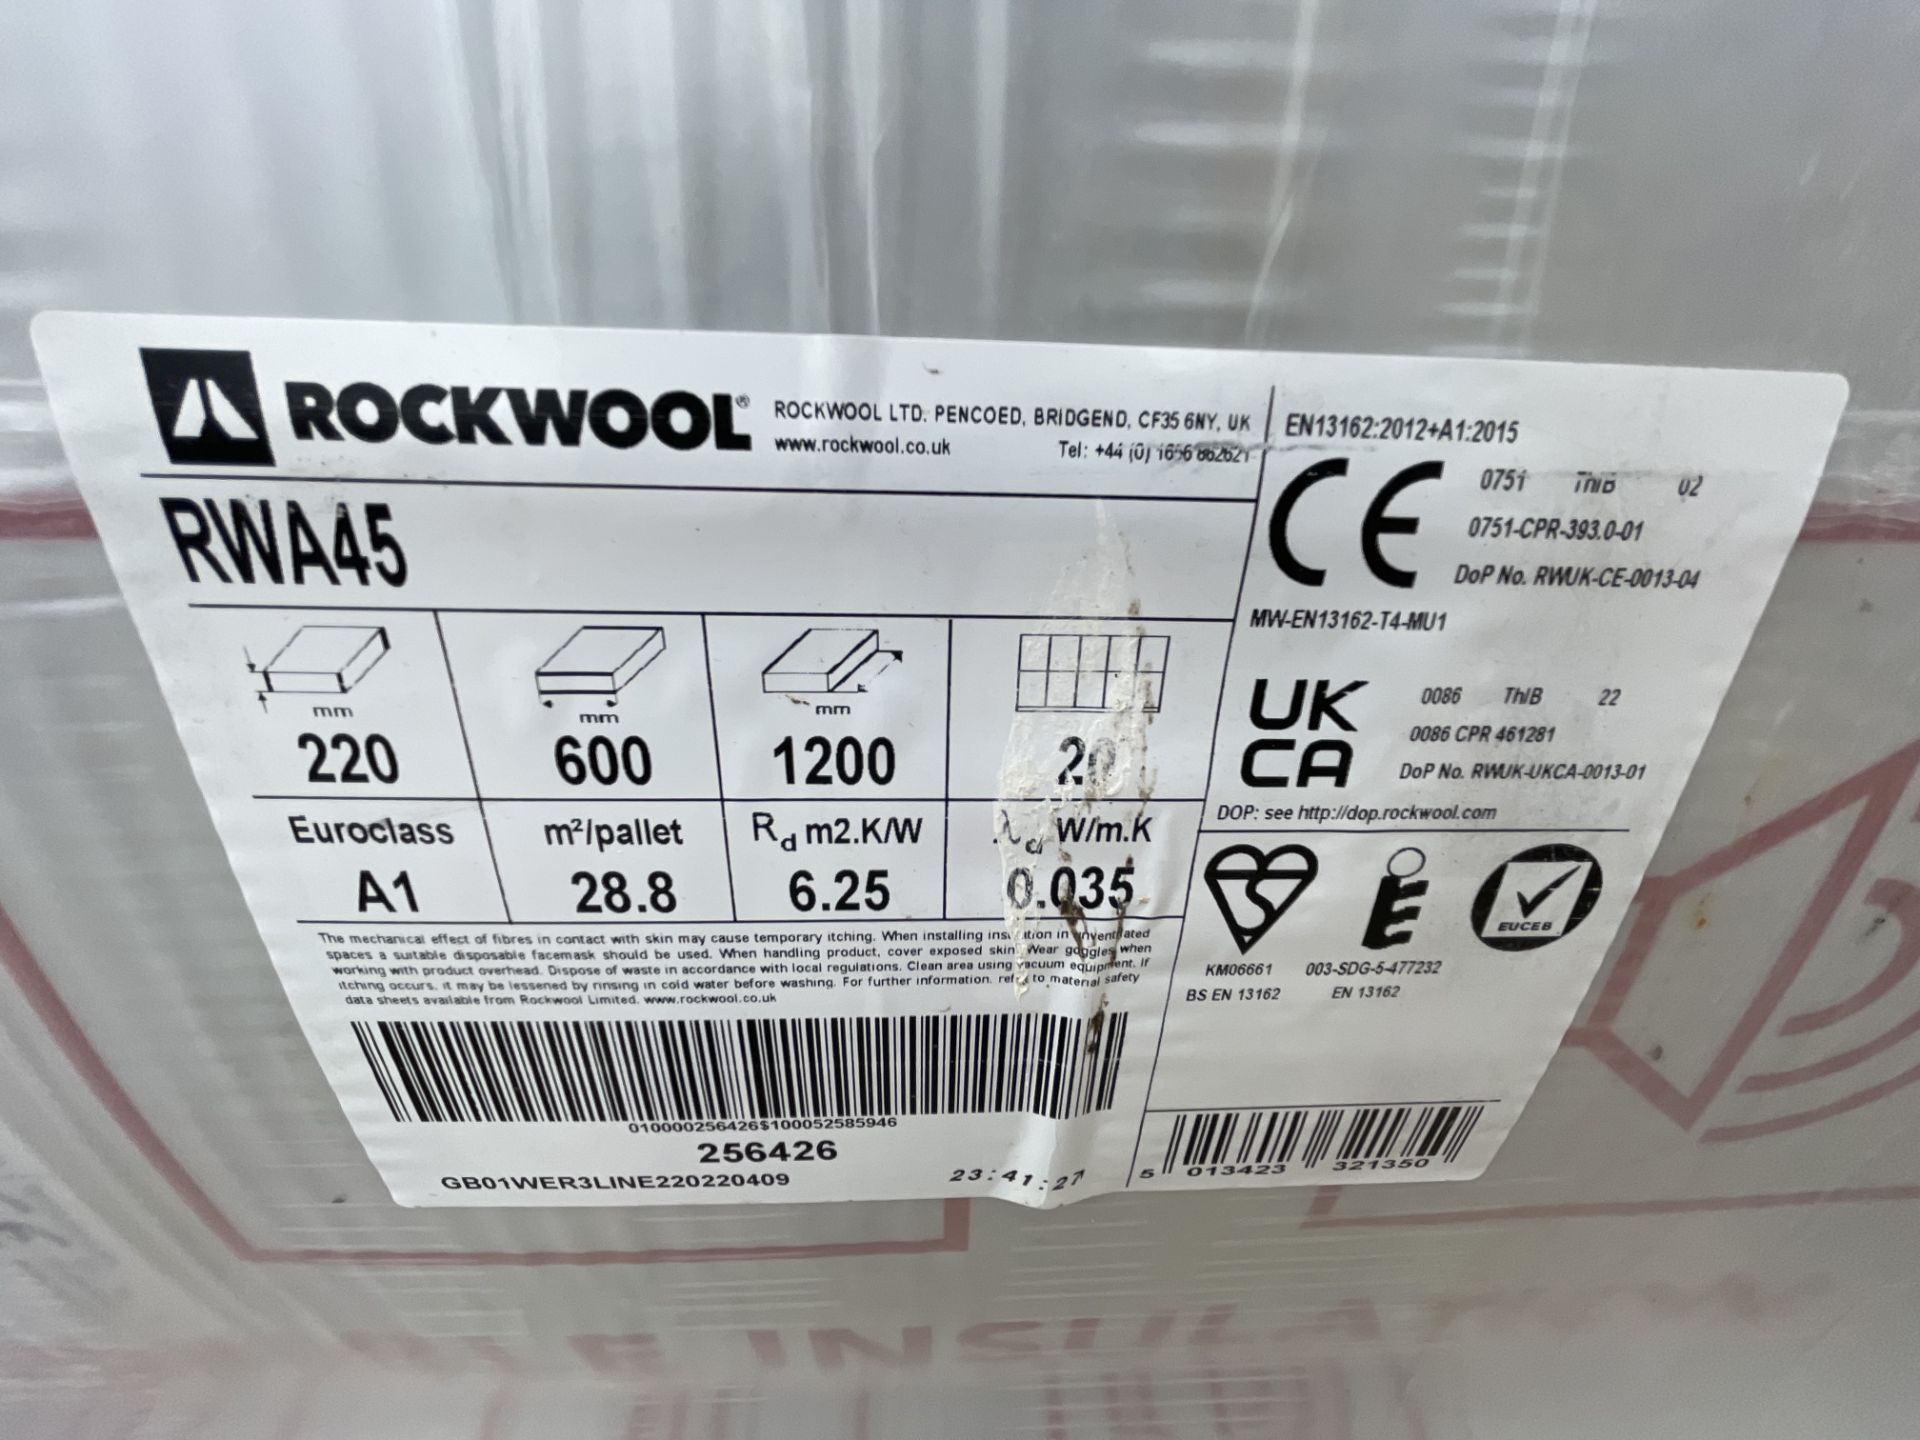 7x Pallets of Rockwool RWA45 220x600x1200mm 1.44M2/Pack Insulation - Image 3 of 4